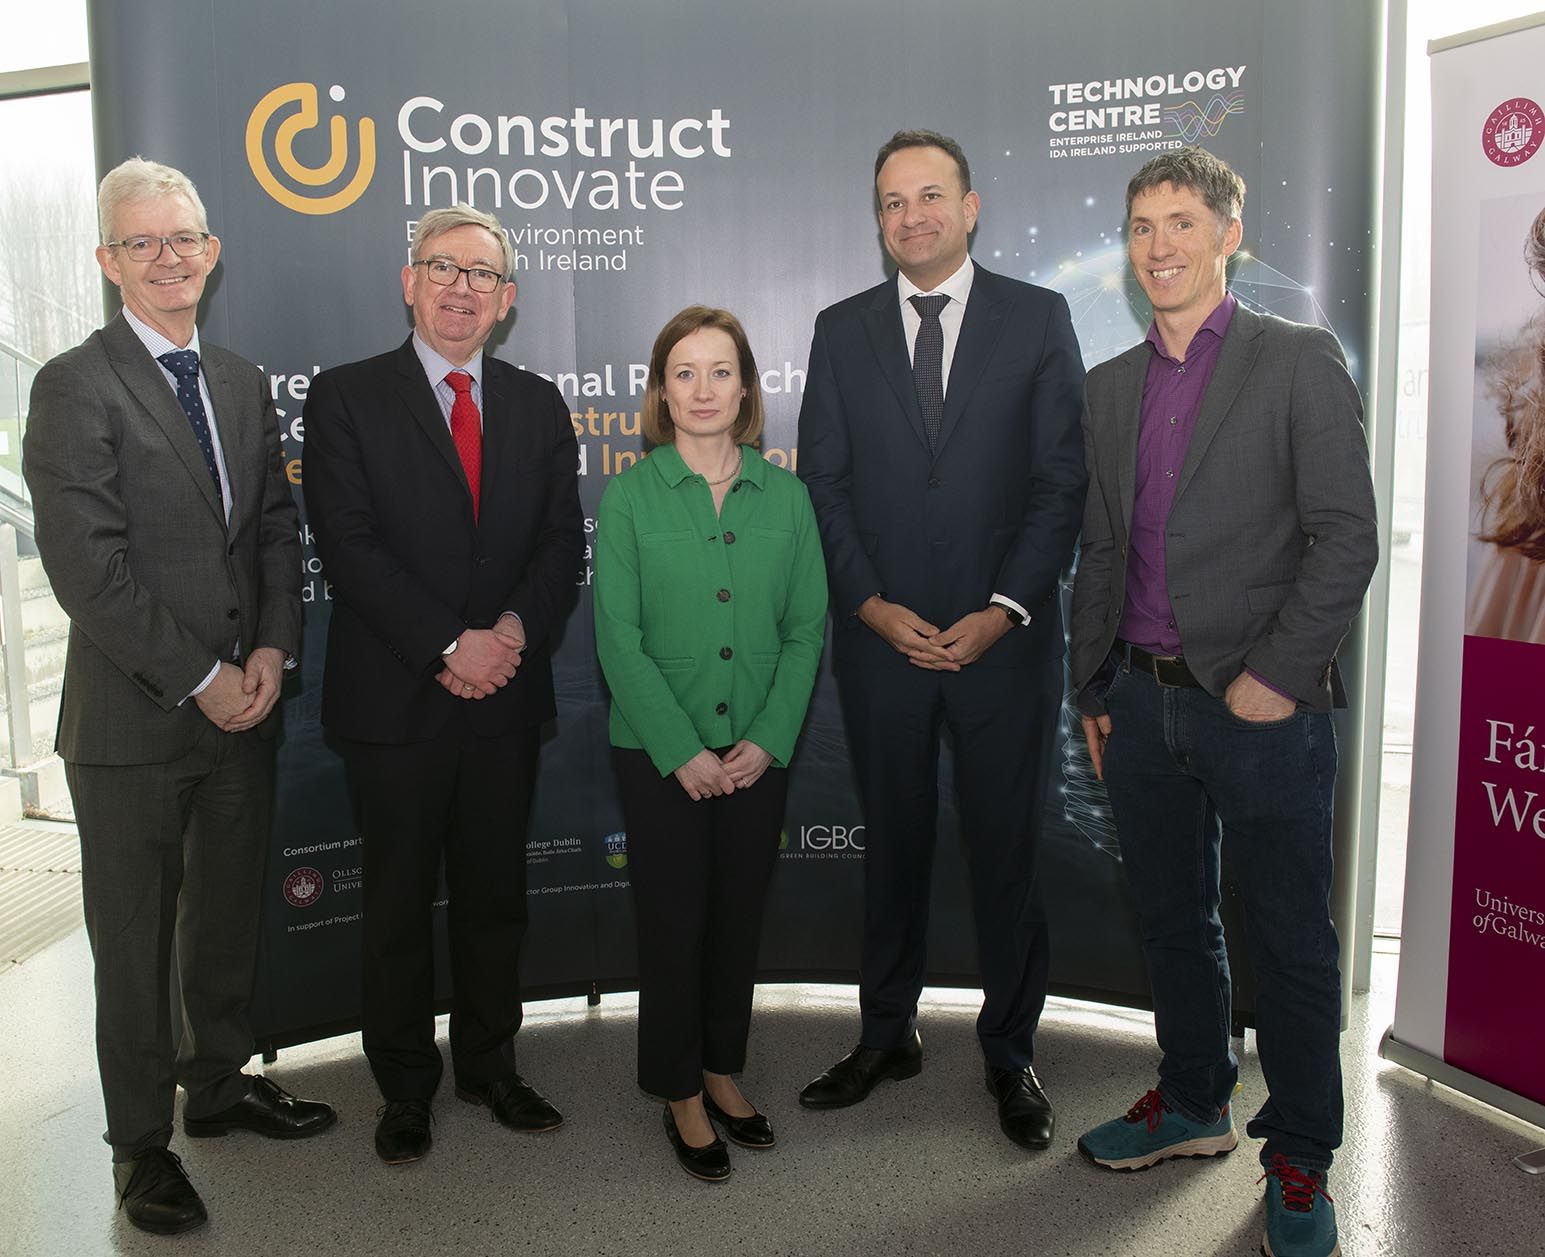 Construct Innovative aims to build a better construction sector in Ireland